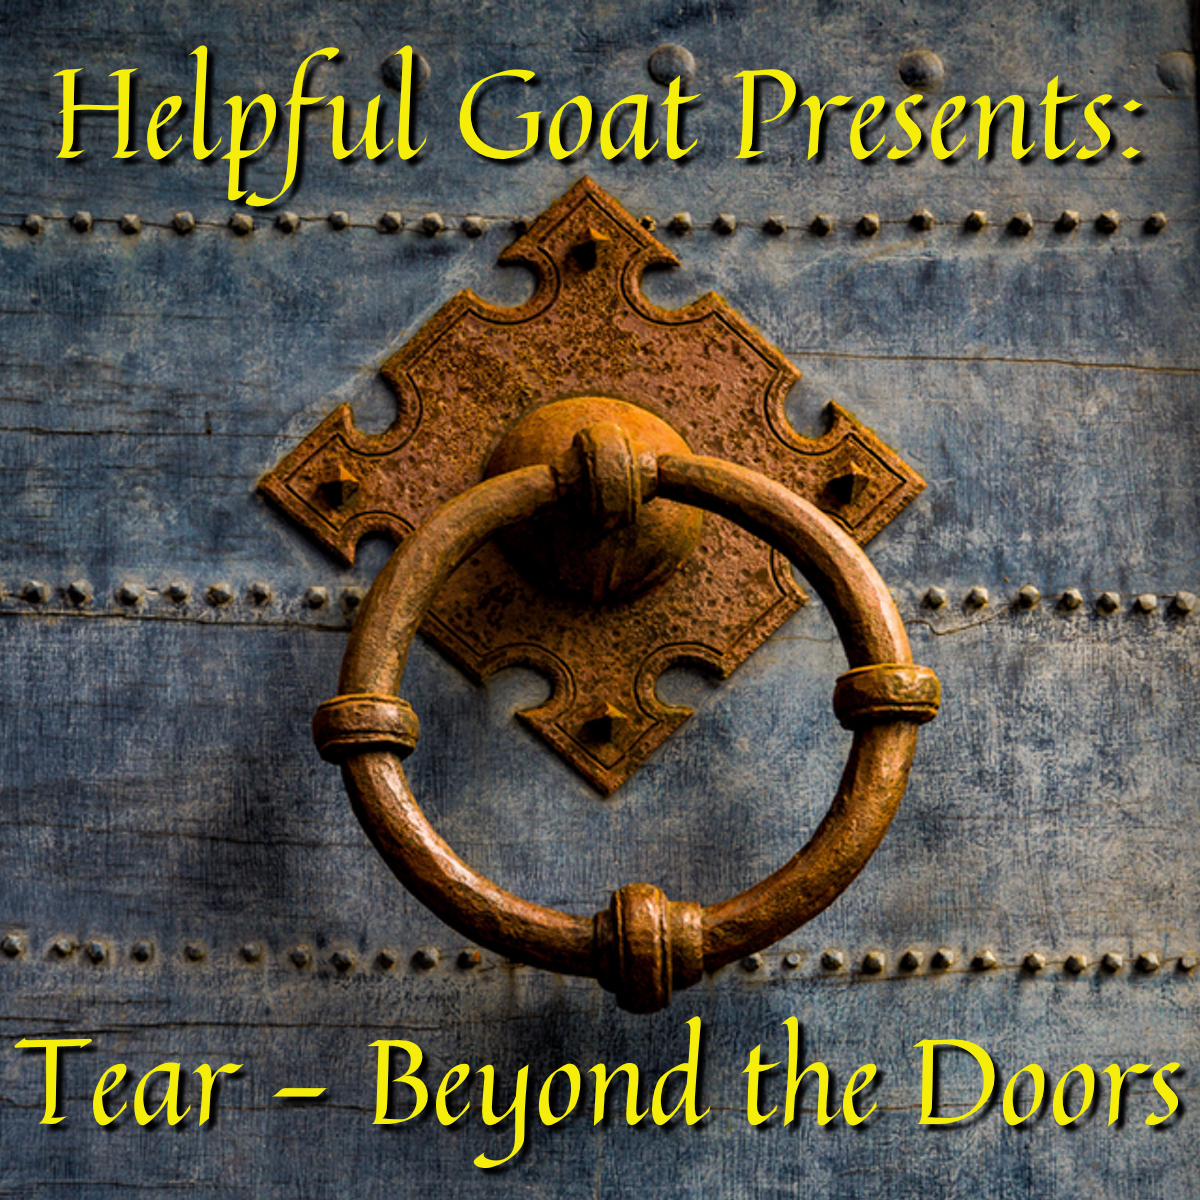 Tear: Beyond the Doors, Ep 15 - Our Best Lead